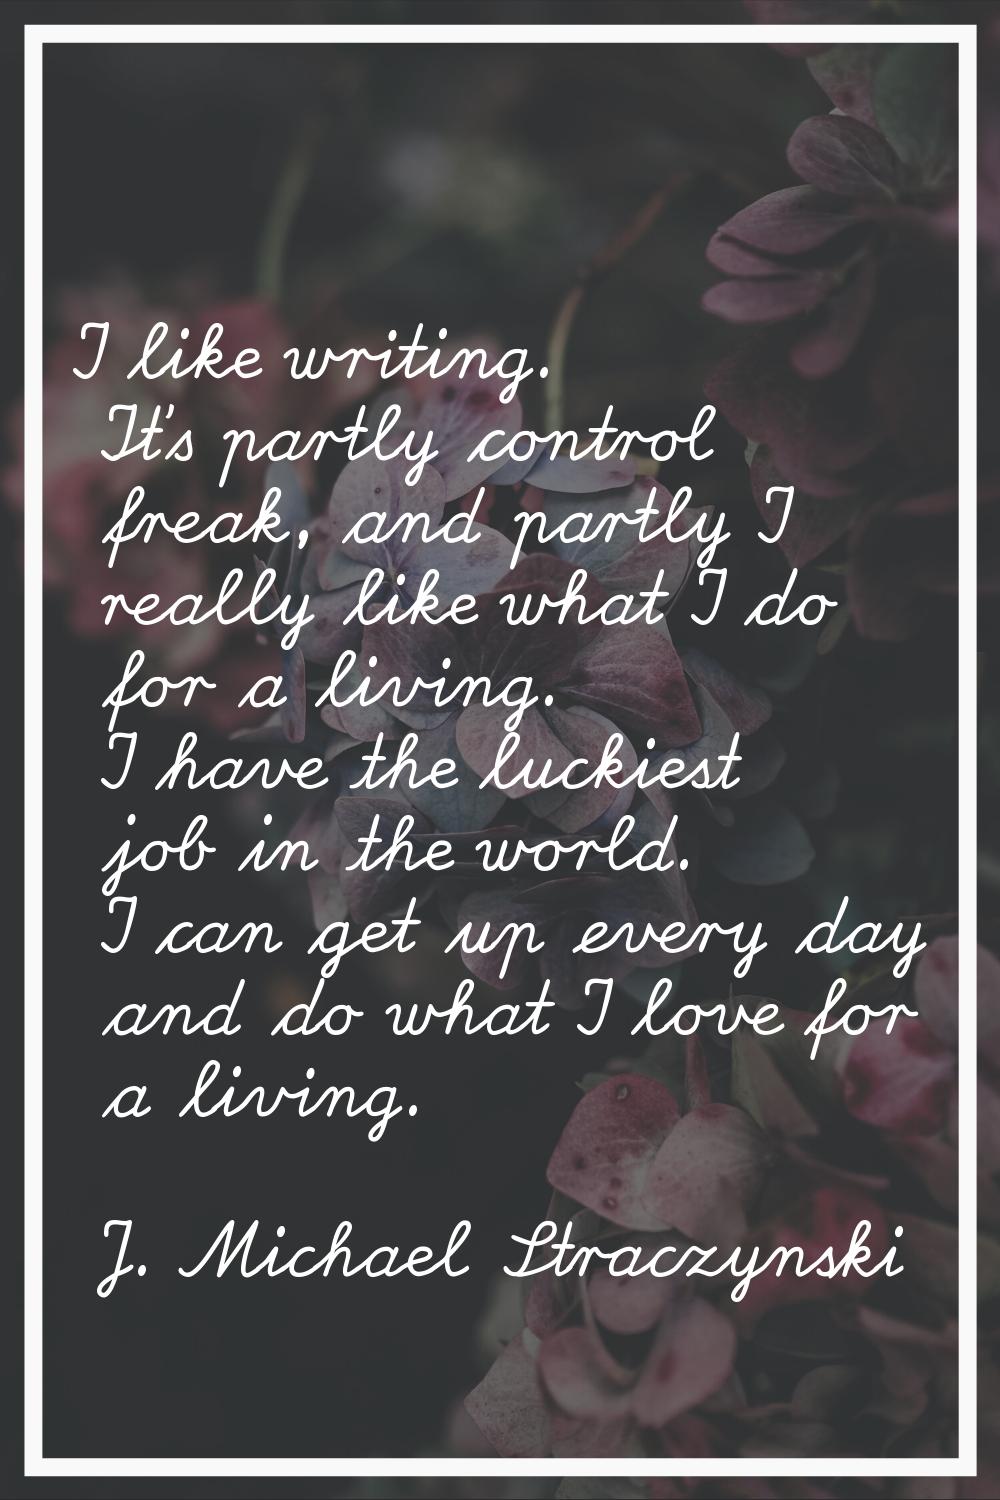 I like writing. It's partly control freak, and partly I really like what I do for a living. I have 